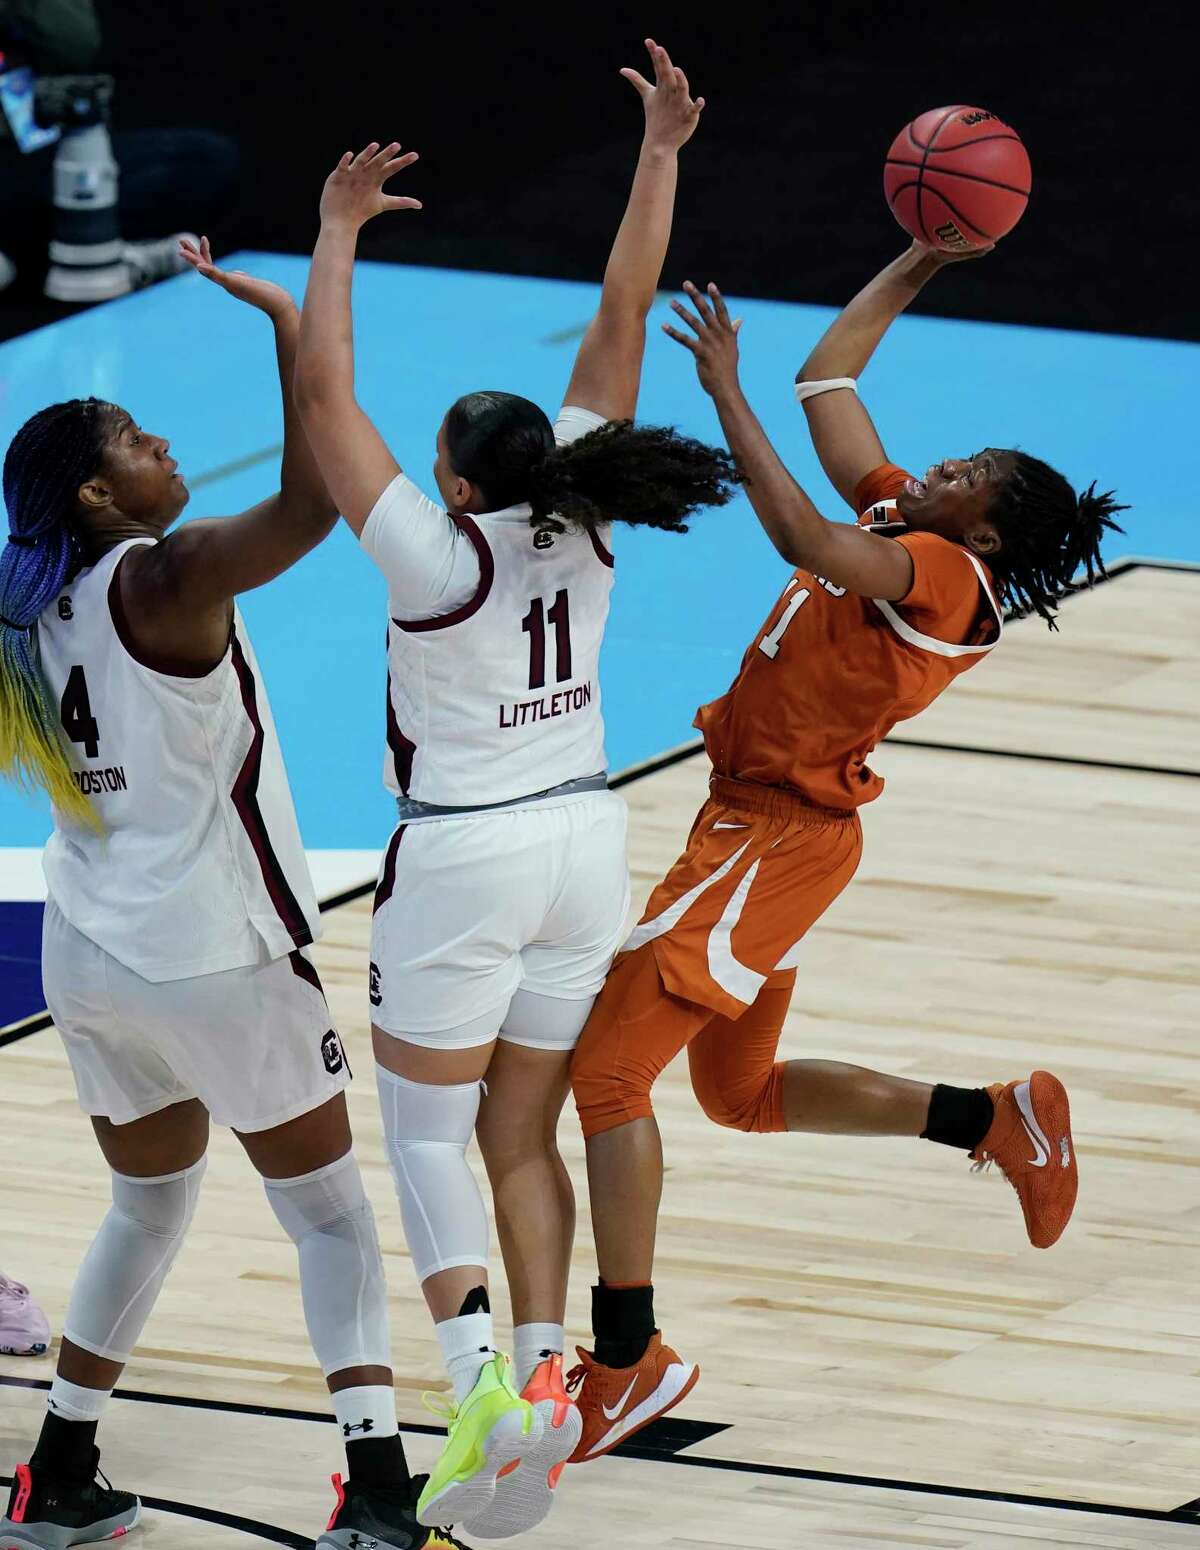 Texas guard Joanne Allen-Taylor, right, drives to the basket against South Carolina guard Destiny Littleton, center, and forward Aliyah Boston (4) during the first half of a college basketball game in the Elite Eight round of the women's NCAA tournament at the Alamodome in San Antonio, Tuesday, March 30, 2021. (AP Photo/Eric Gay)